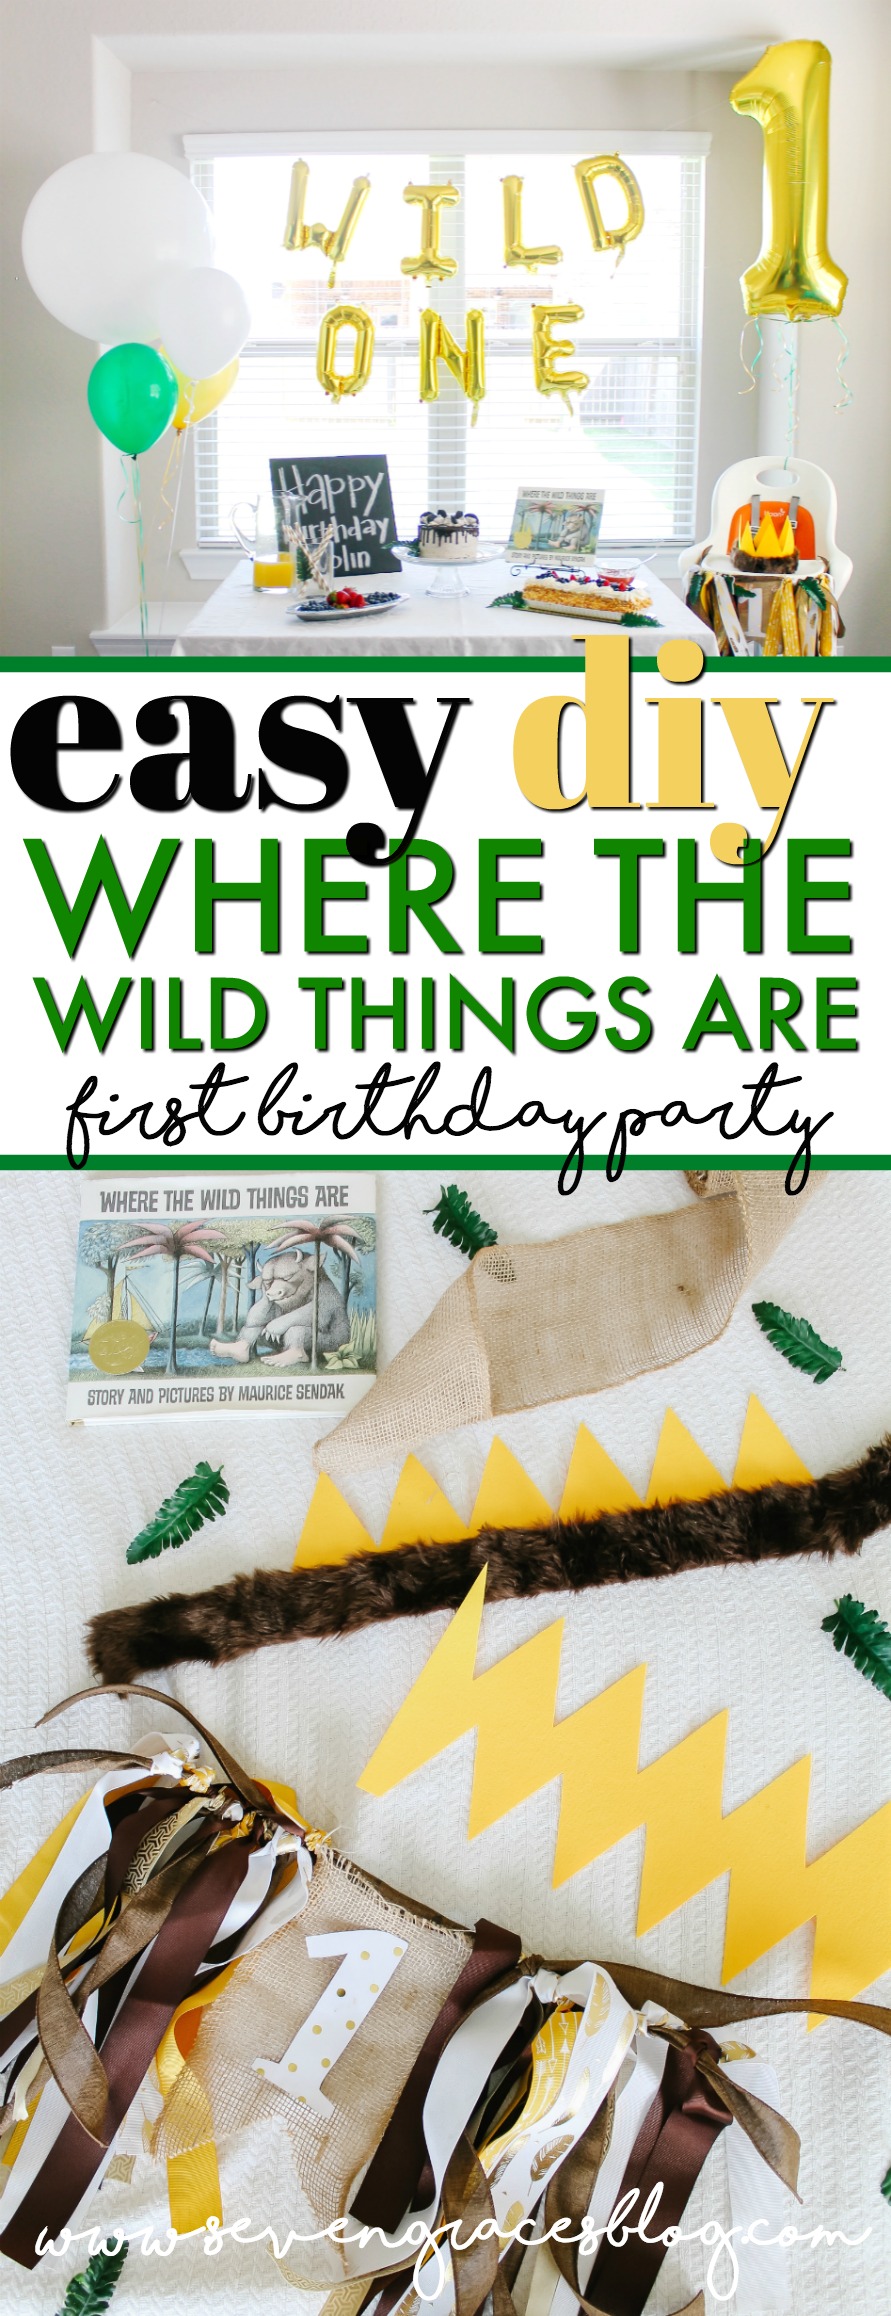 Cute and easy DIY no-sew felt crown and banner. The cutest WILD ONE birthday party inspired by Where the Wild Things Are! Easy DIYs to recreate a simple and fun first birthday party! #diy #party #wildone #firstbirthday